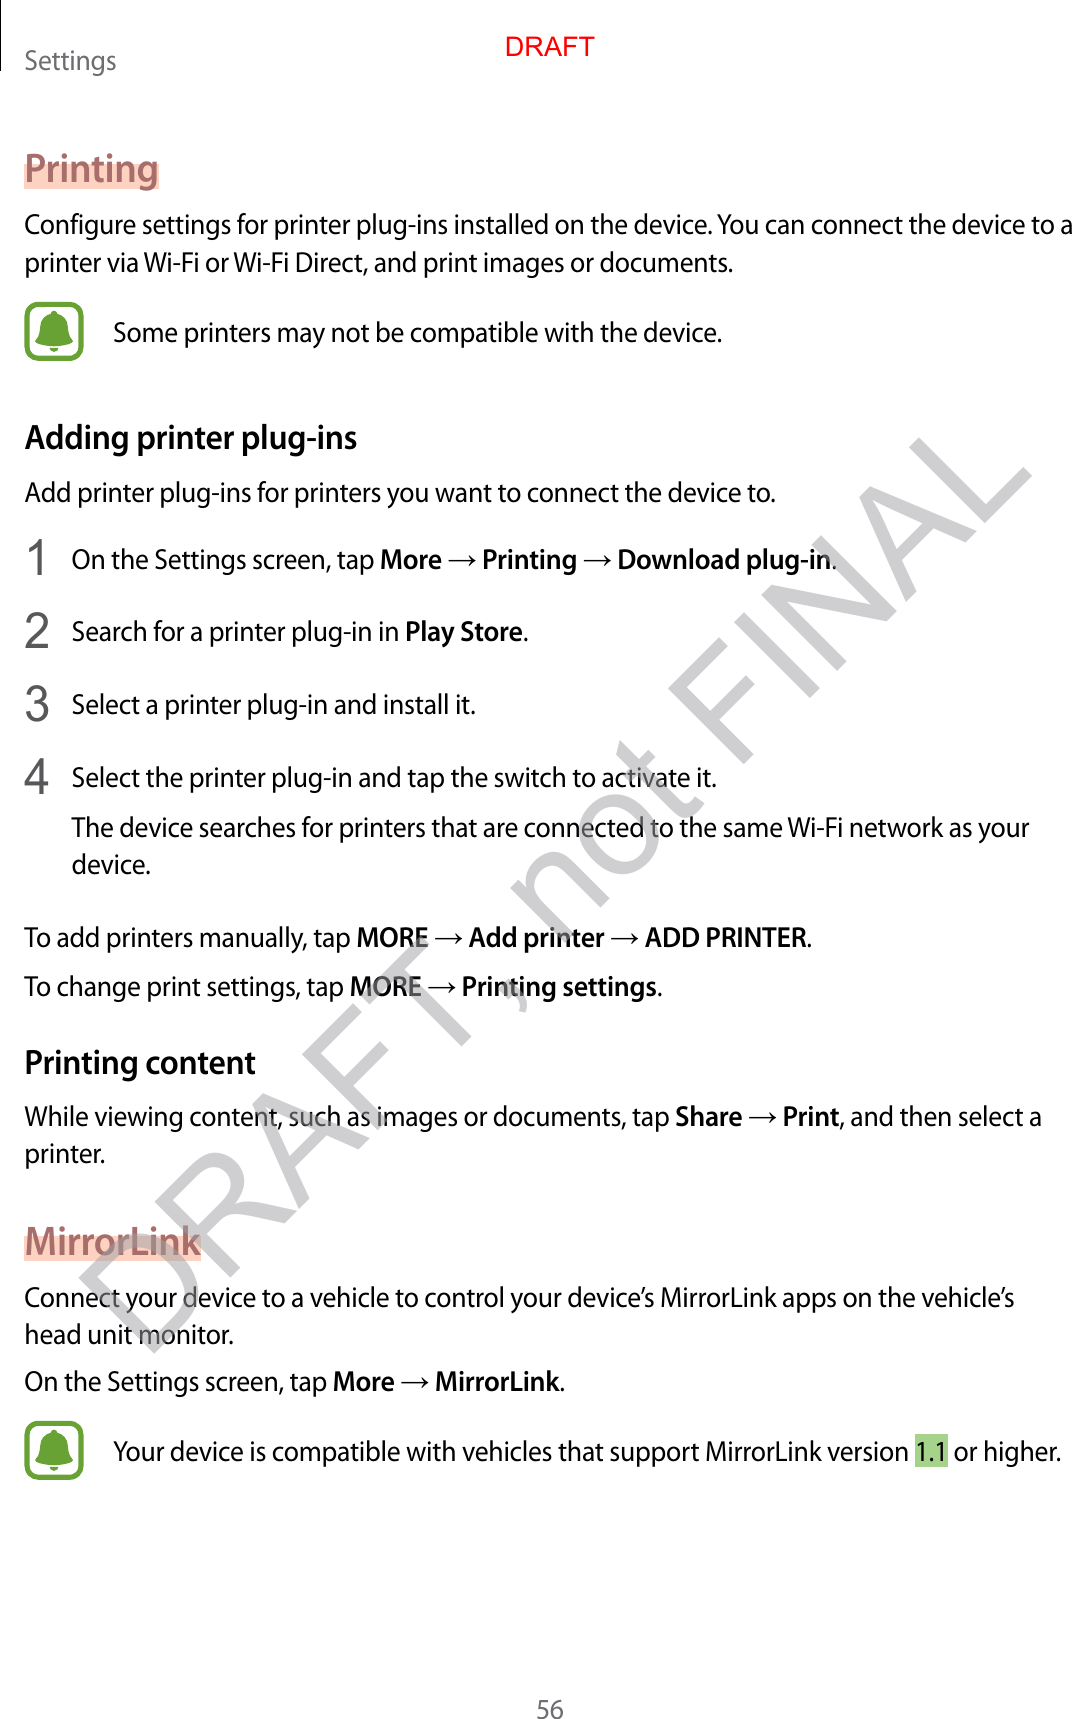 Settings56PrintingConfigure settings for printer plug-ins installed on the device. You can connect the device to a printer via Wi-Fi or Wi-Fi Direct, and print images or documents.Some printers may not be compatible with the device.Adding printer plug-insAdd printer plug-ins for printers you want to connect the device to.1  On the Settings screen, tap More → Printing → Download plug-in.2  Search for a printer plug-in in Play Store.3  Select a printer plug-in and install it.4  Select the printer plug-in and tap the switch to activate it.The device searches for printers that are connected to the same Wi-Fi network as your device.To add printers manually, tap MORE → Add printer → ADD PRINTER.To change print settings, tap MORE → Printing settings.Printing contentWhile viewing content, such as images or documents, tap Share → Print, and then select a printer.MirrorLinkConnect your device to a vehicle to control your device’s MirrorLink apps on the vehicle’s head unit monitor.On the Settings screen, tap More → MirrorLink.Your device is compatible with vehicles that support MirrorLink version 1.1 or higher.DRAFTDRAFT, not FINAL